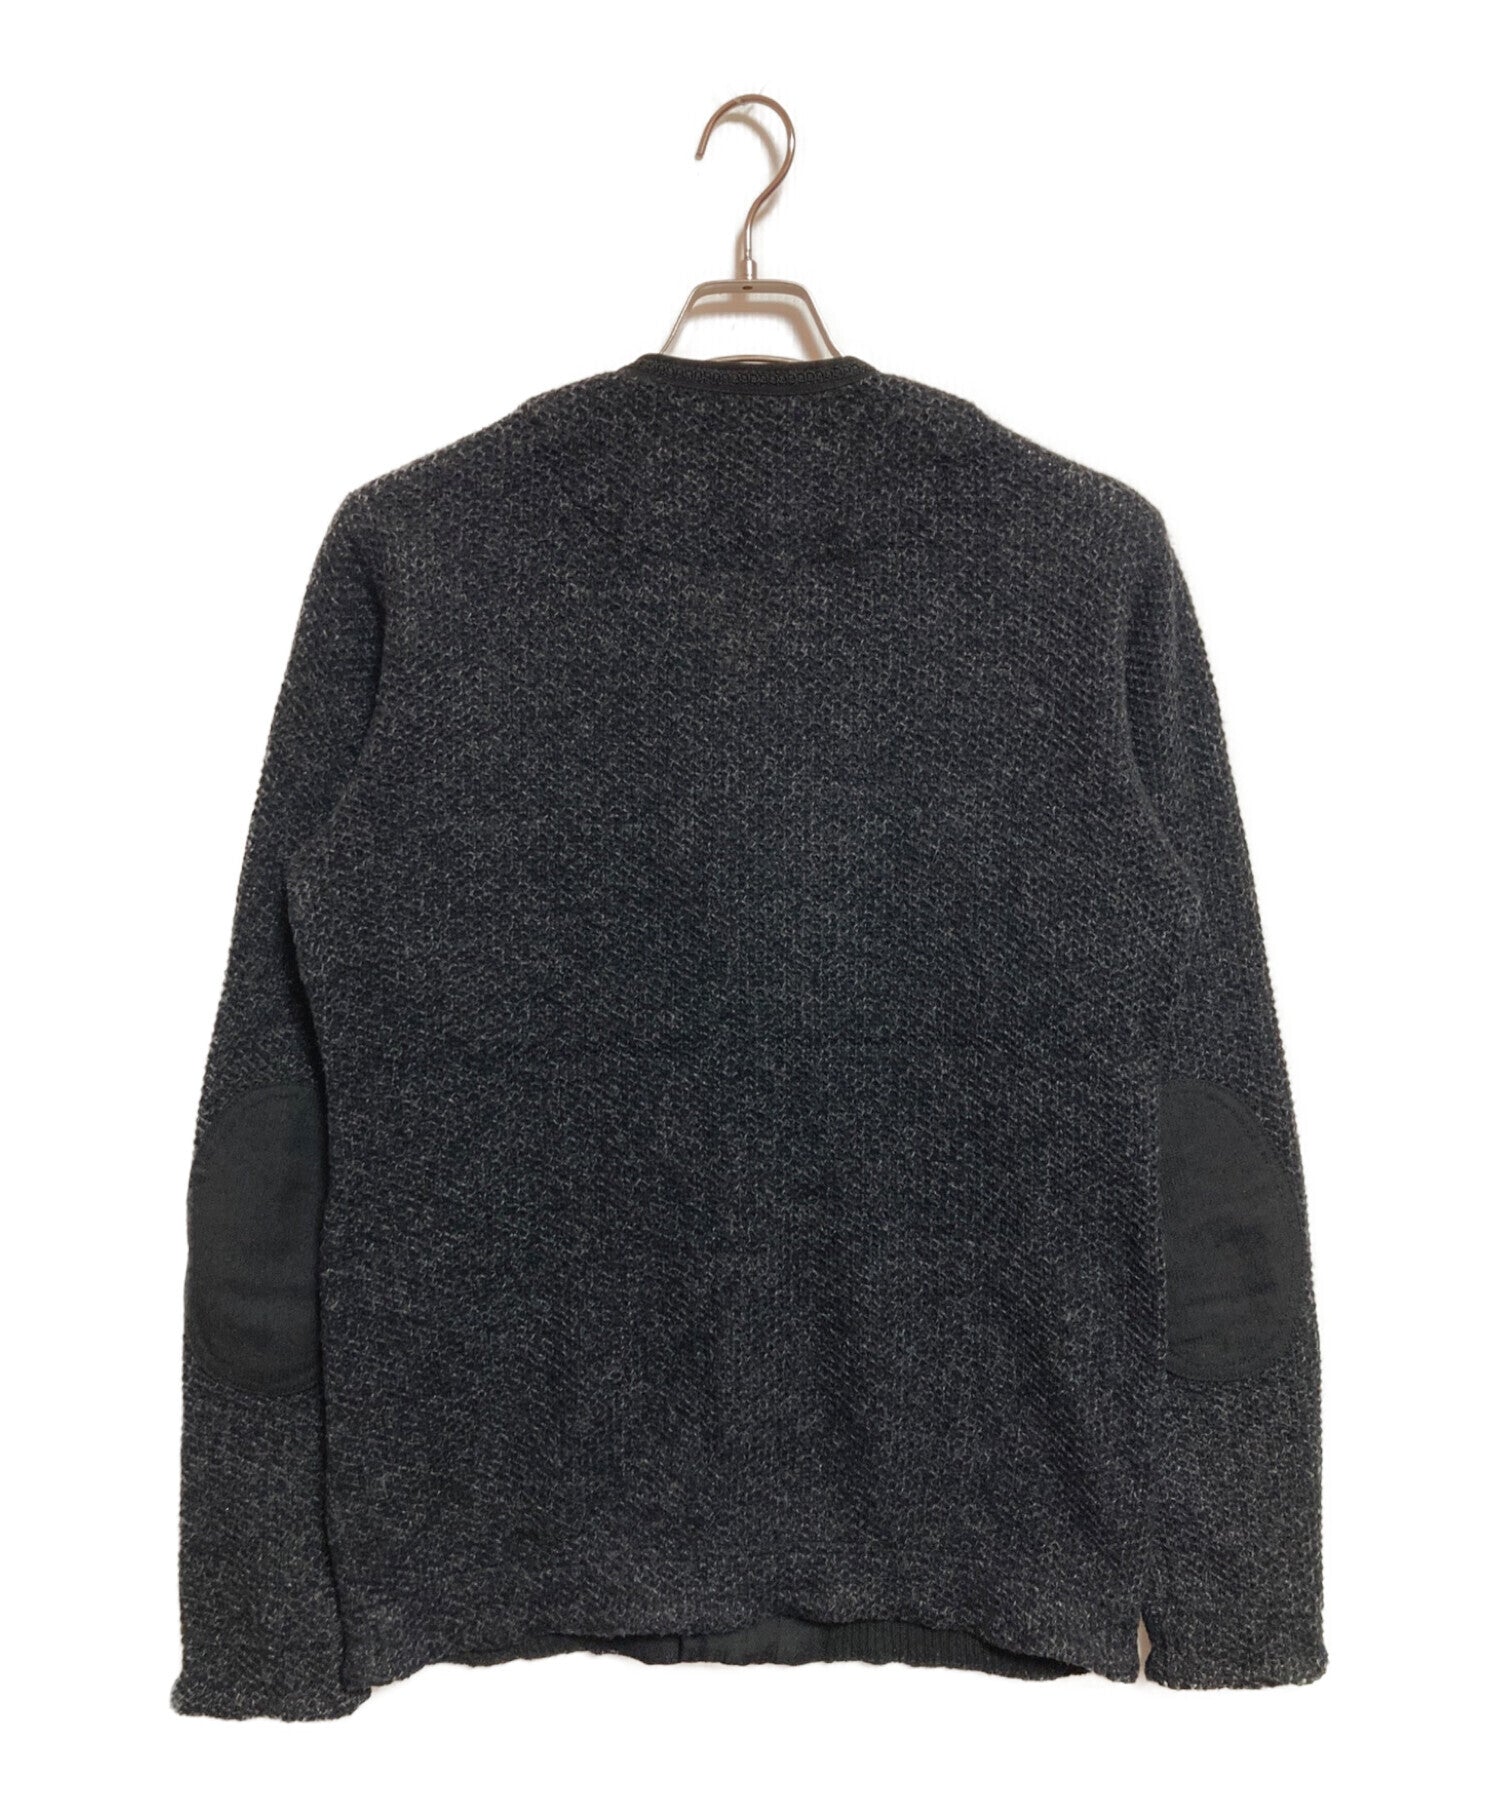 [Pre-owned] COMME des GARCONS JUNYA WATANABE MAN Elbow Patch Knit Cardigan  WP-T018